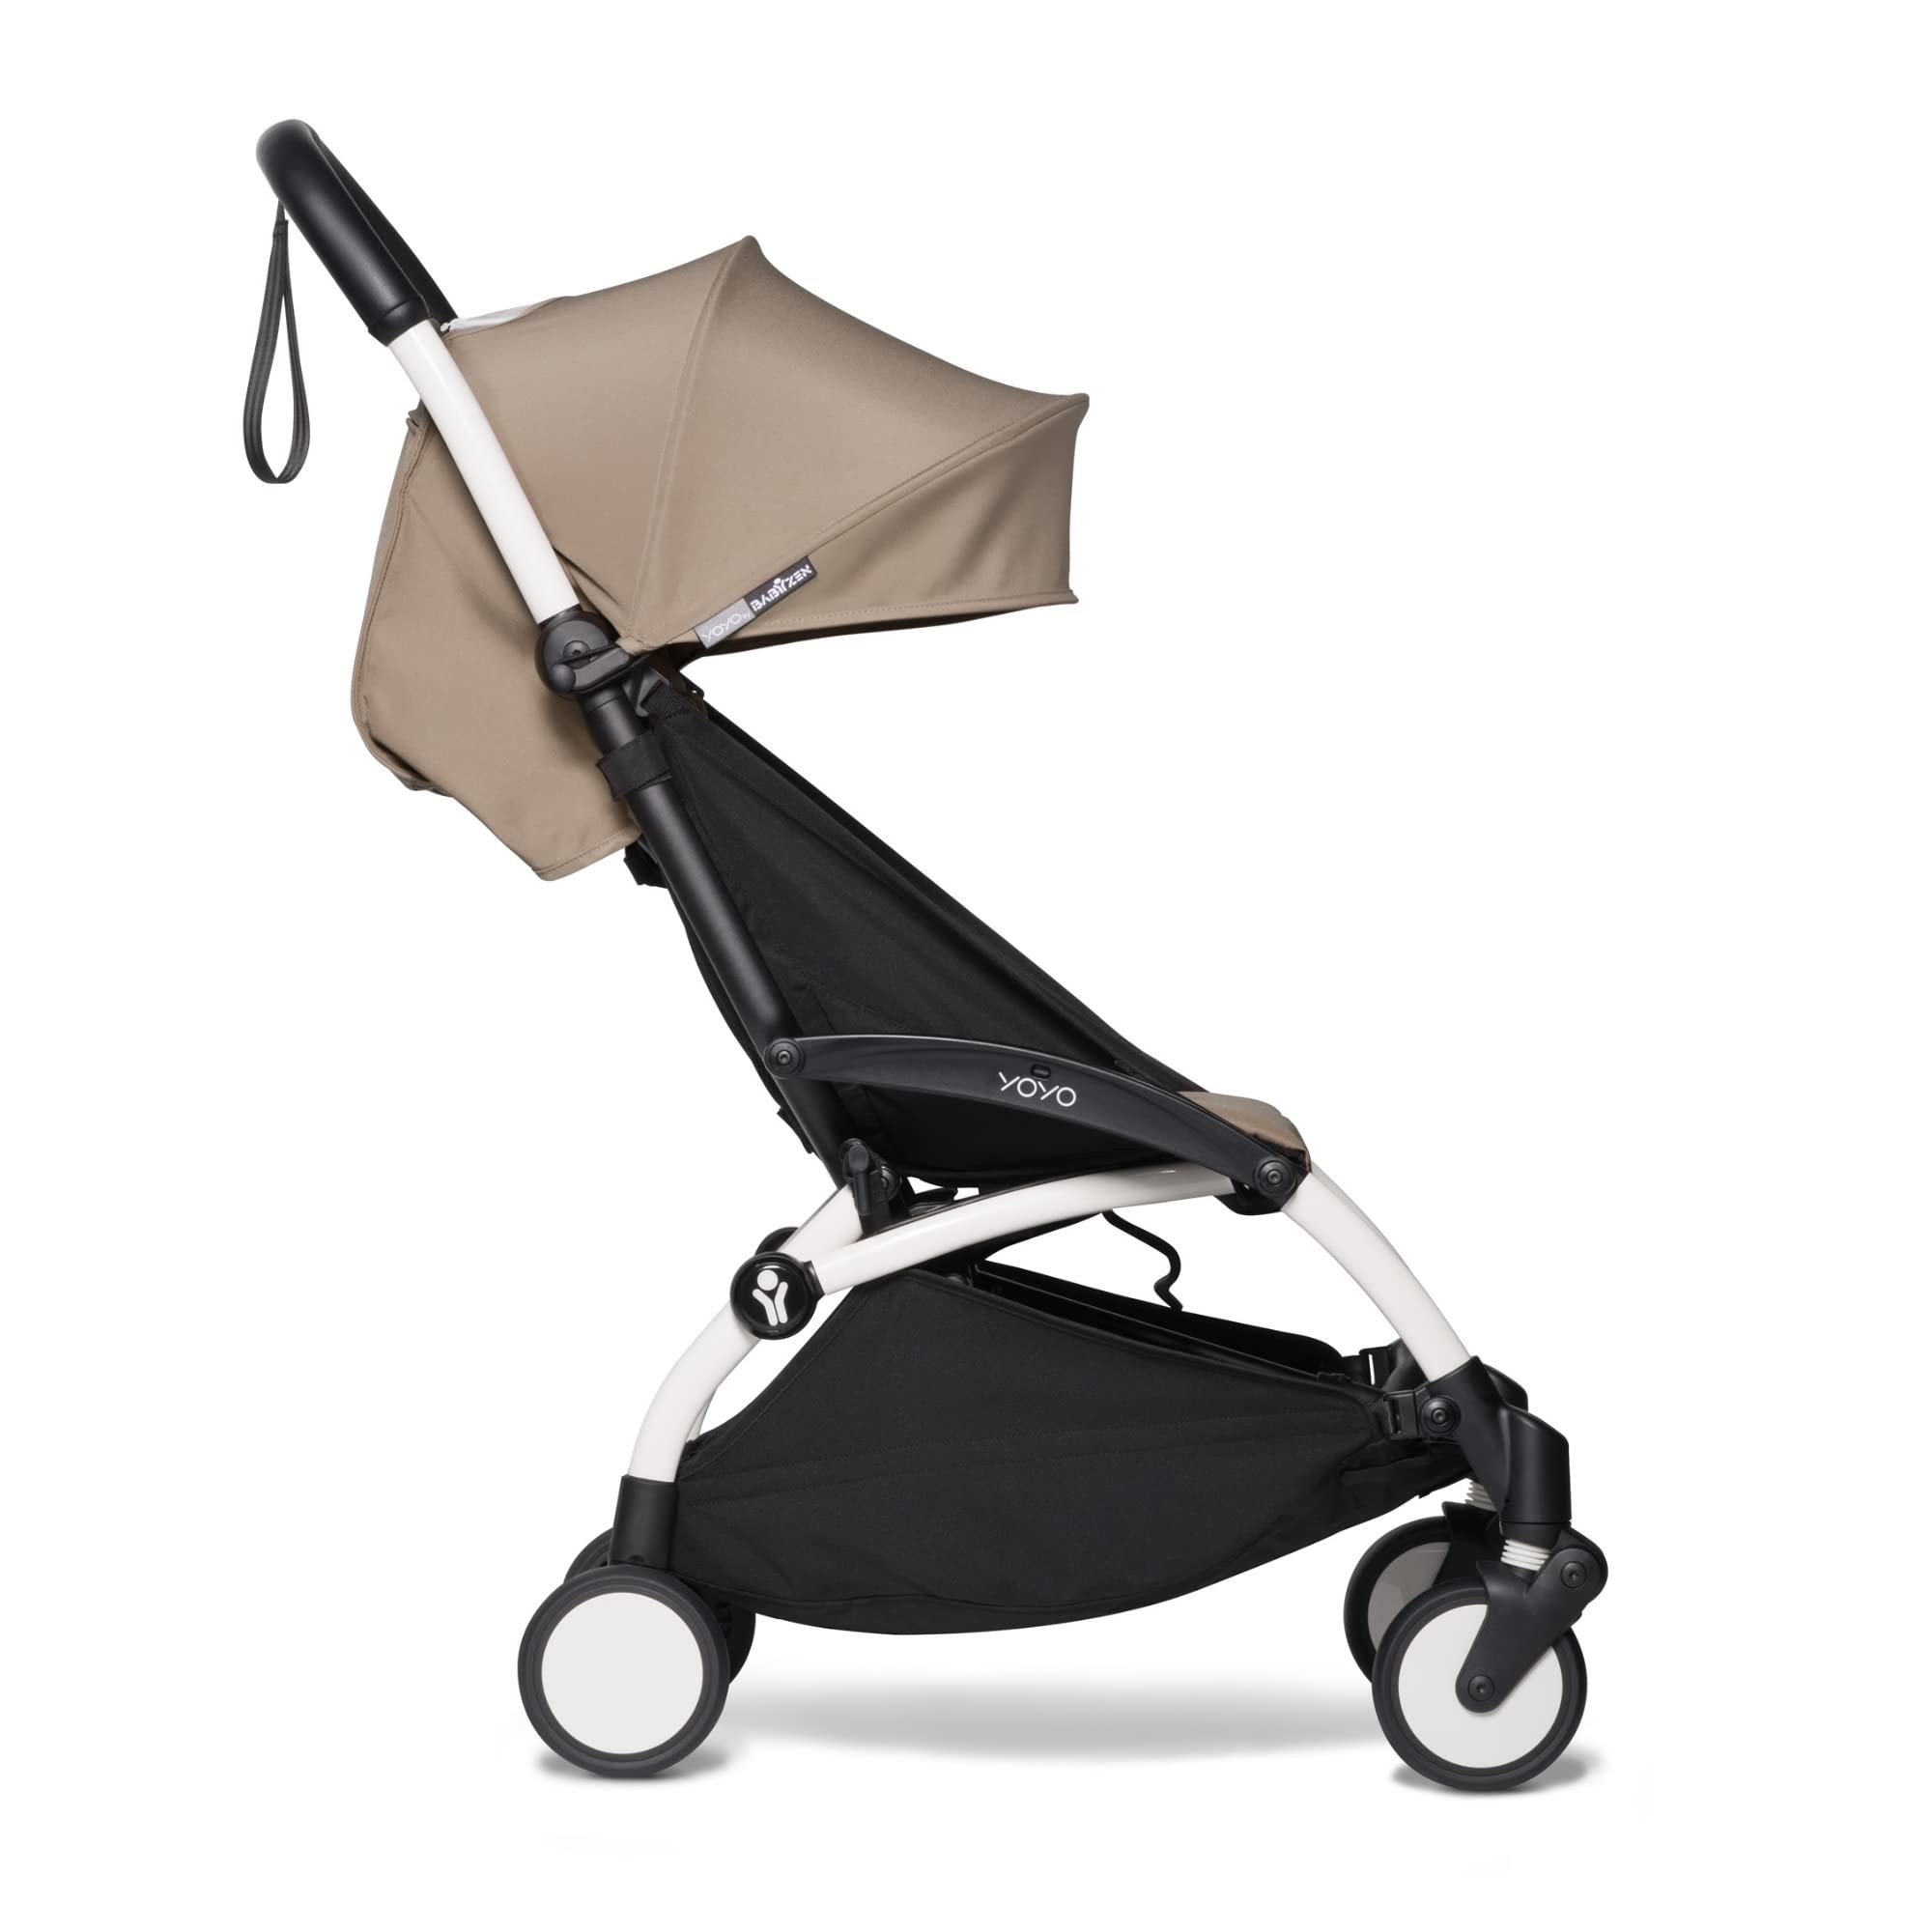 BABYZEN YOYO2 Stroller - Lightweight & compact - Includes White Frame, Taupe Seat cushion + Matching canopy - Suitable for child